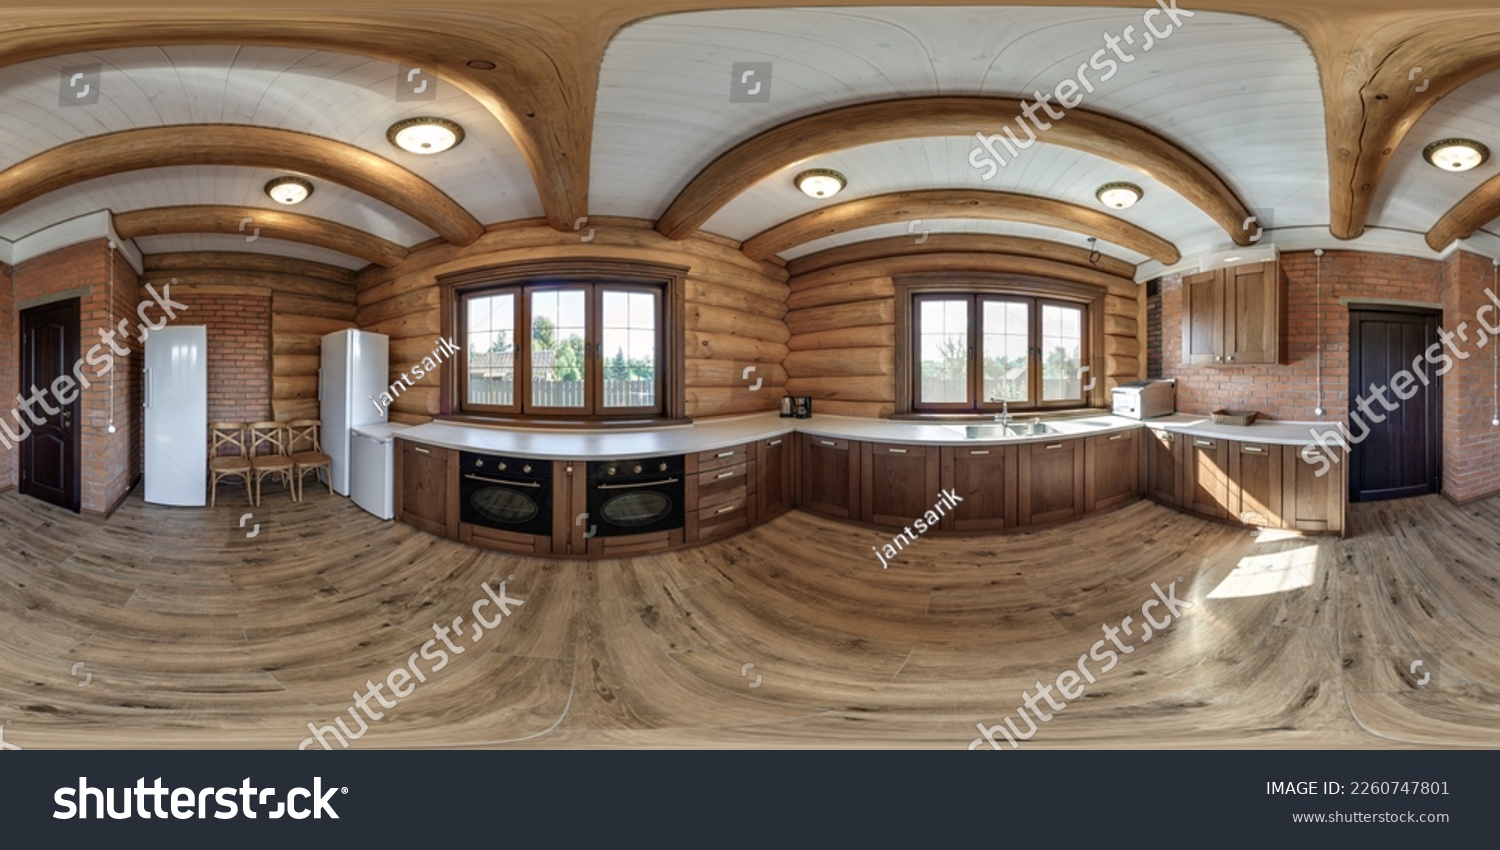 full seamless spherical hdri 360 panorama view in interior of kitchen in eco village vacation home with wooden rafter ceiling in equirectangular spherical  projection.  #2260747801